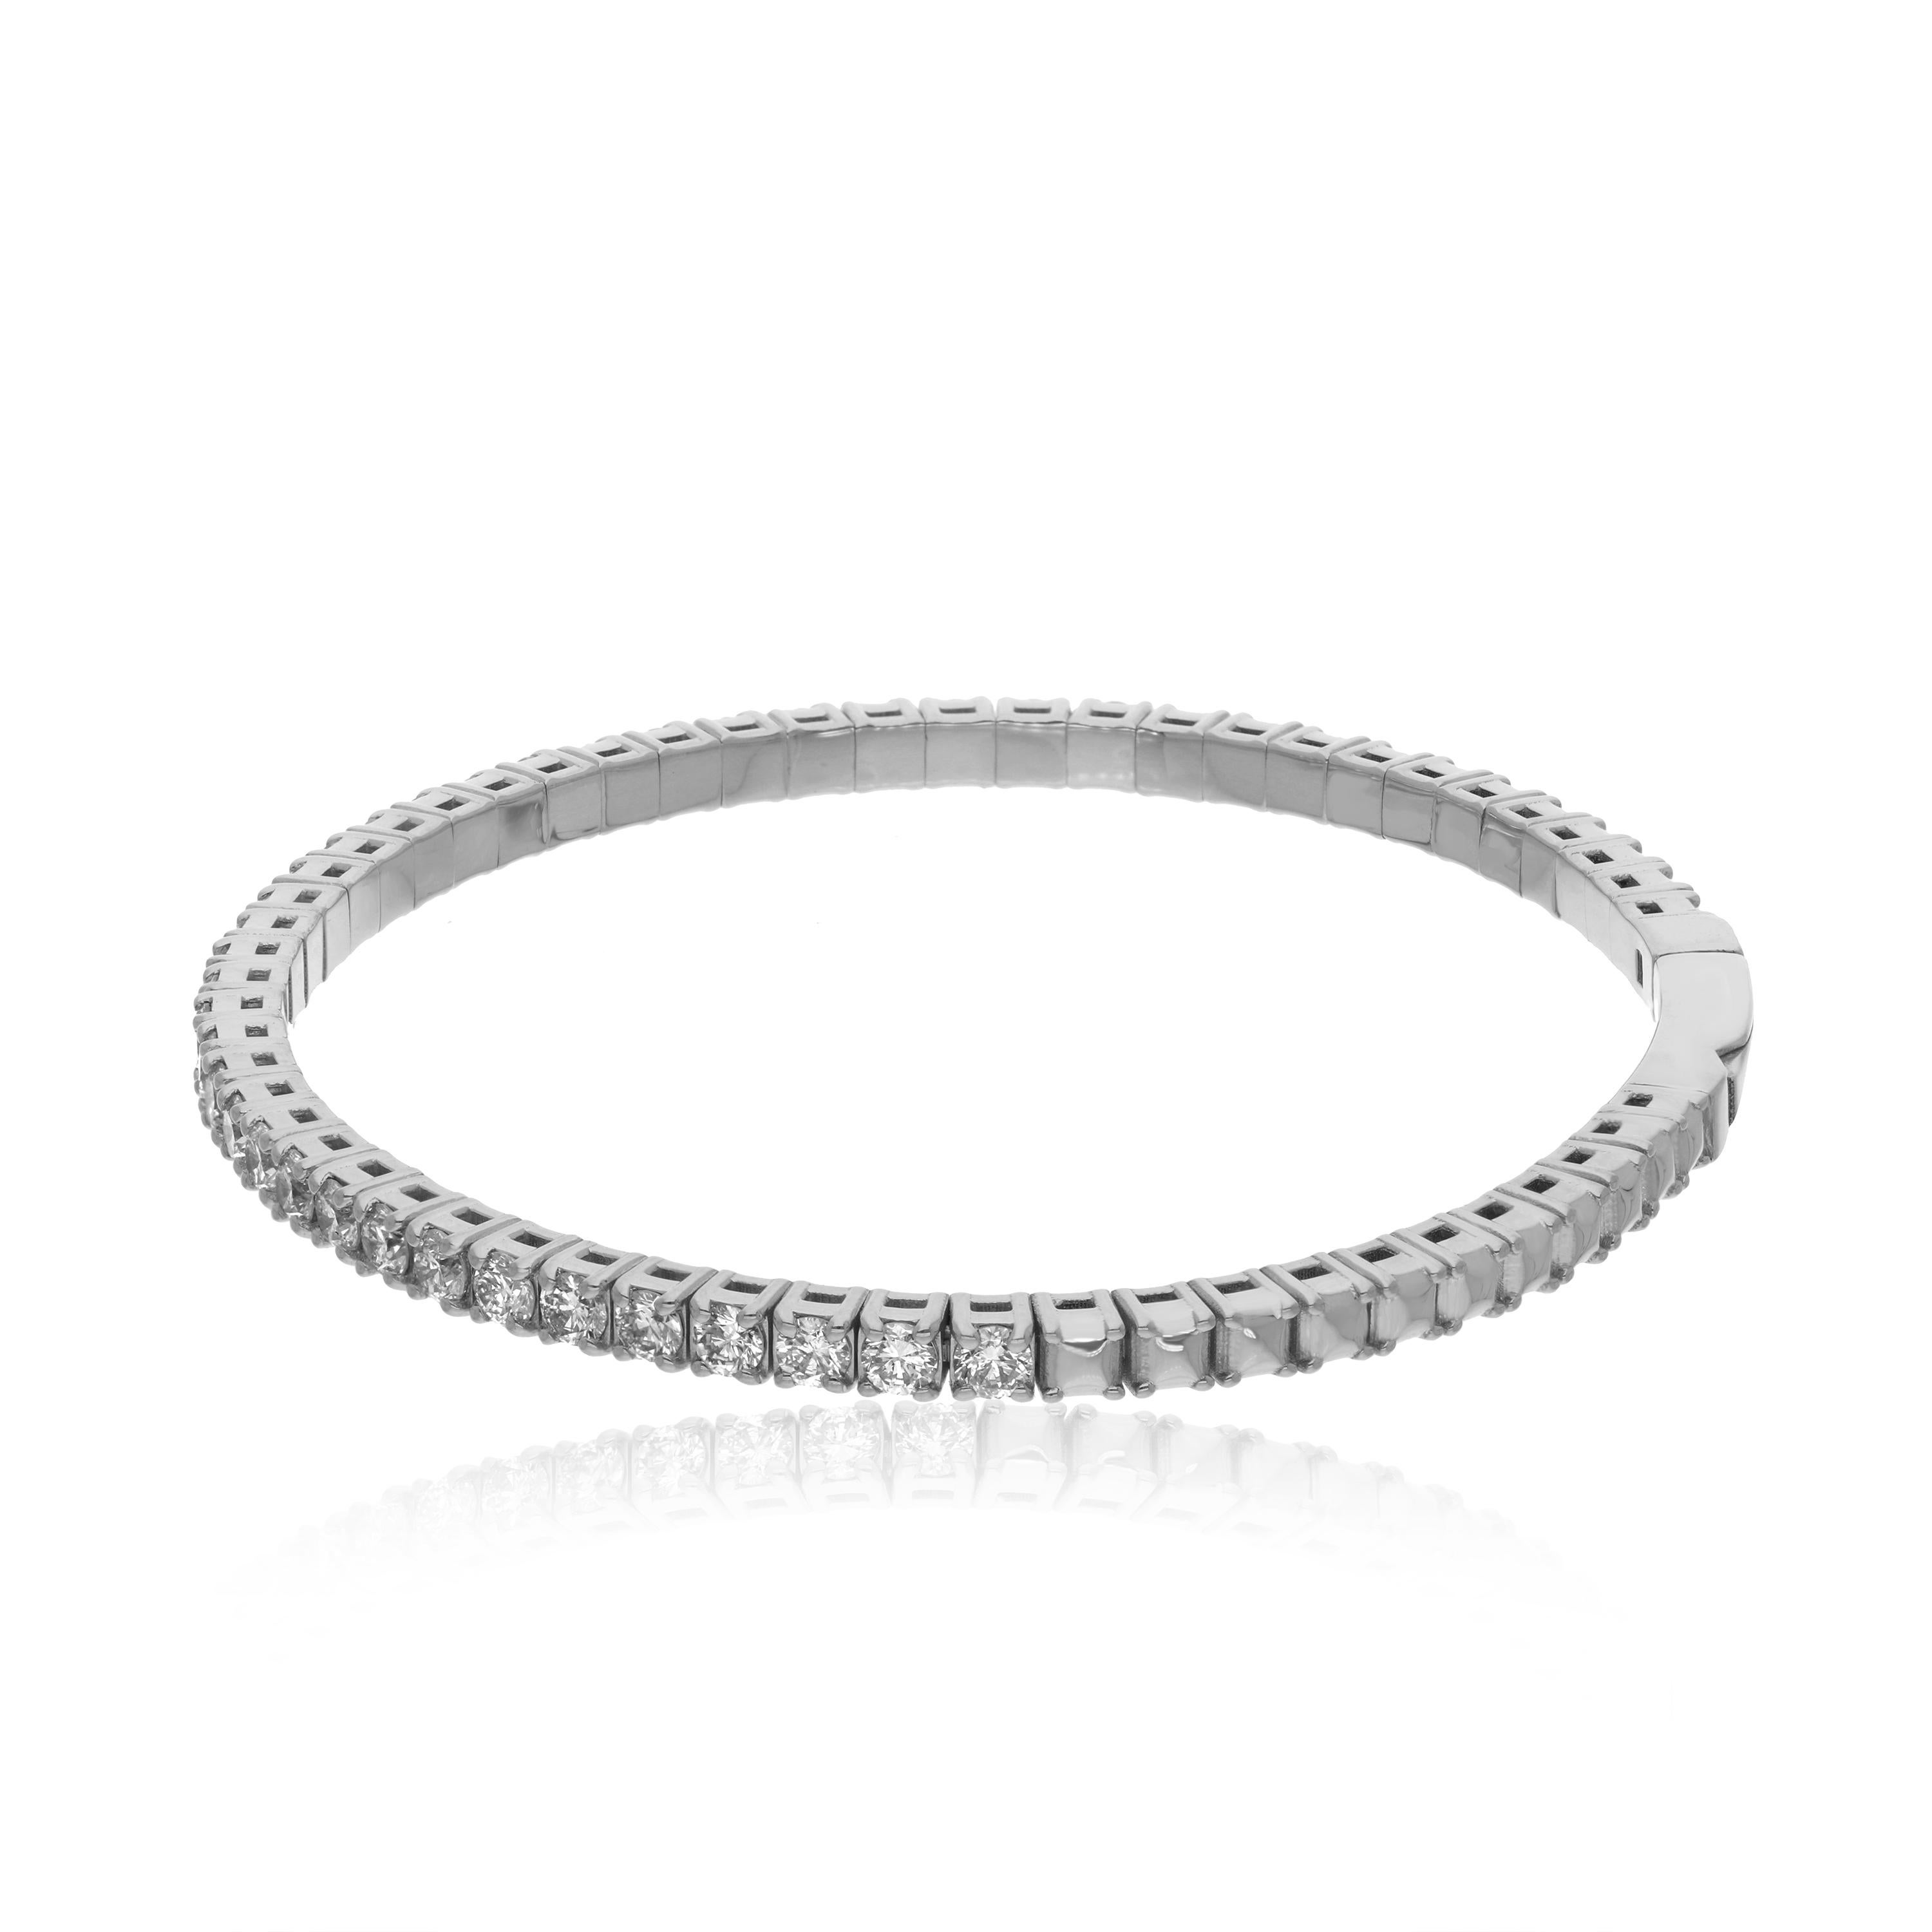 Make a statement with our stunning Gold Diamond Eternity Tennis Bracelet. Crafted with exquisite attention to detail, this piece is perfect for adding a touch of luxury to any outfit. The half eternity design features dazzling diamonds set in 14k